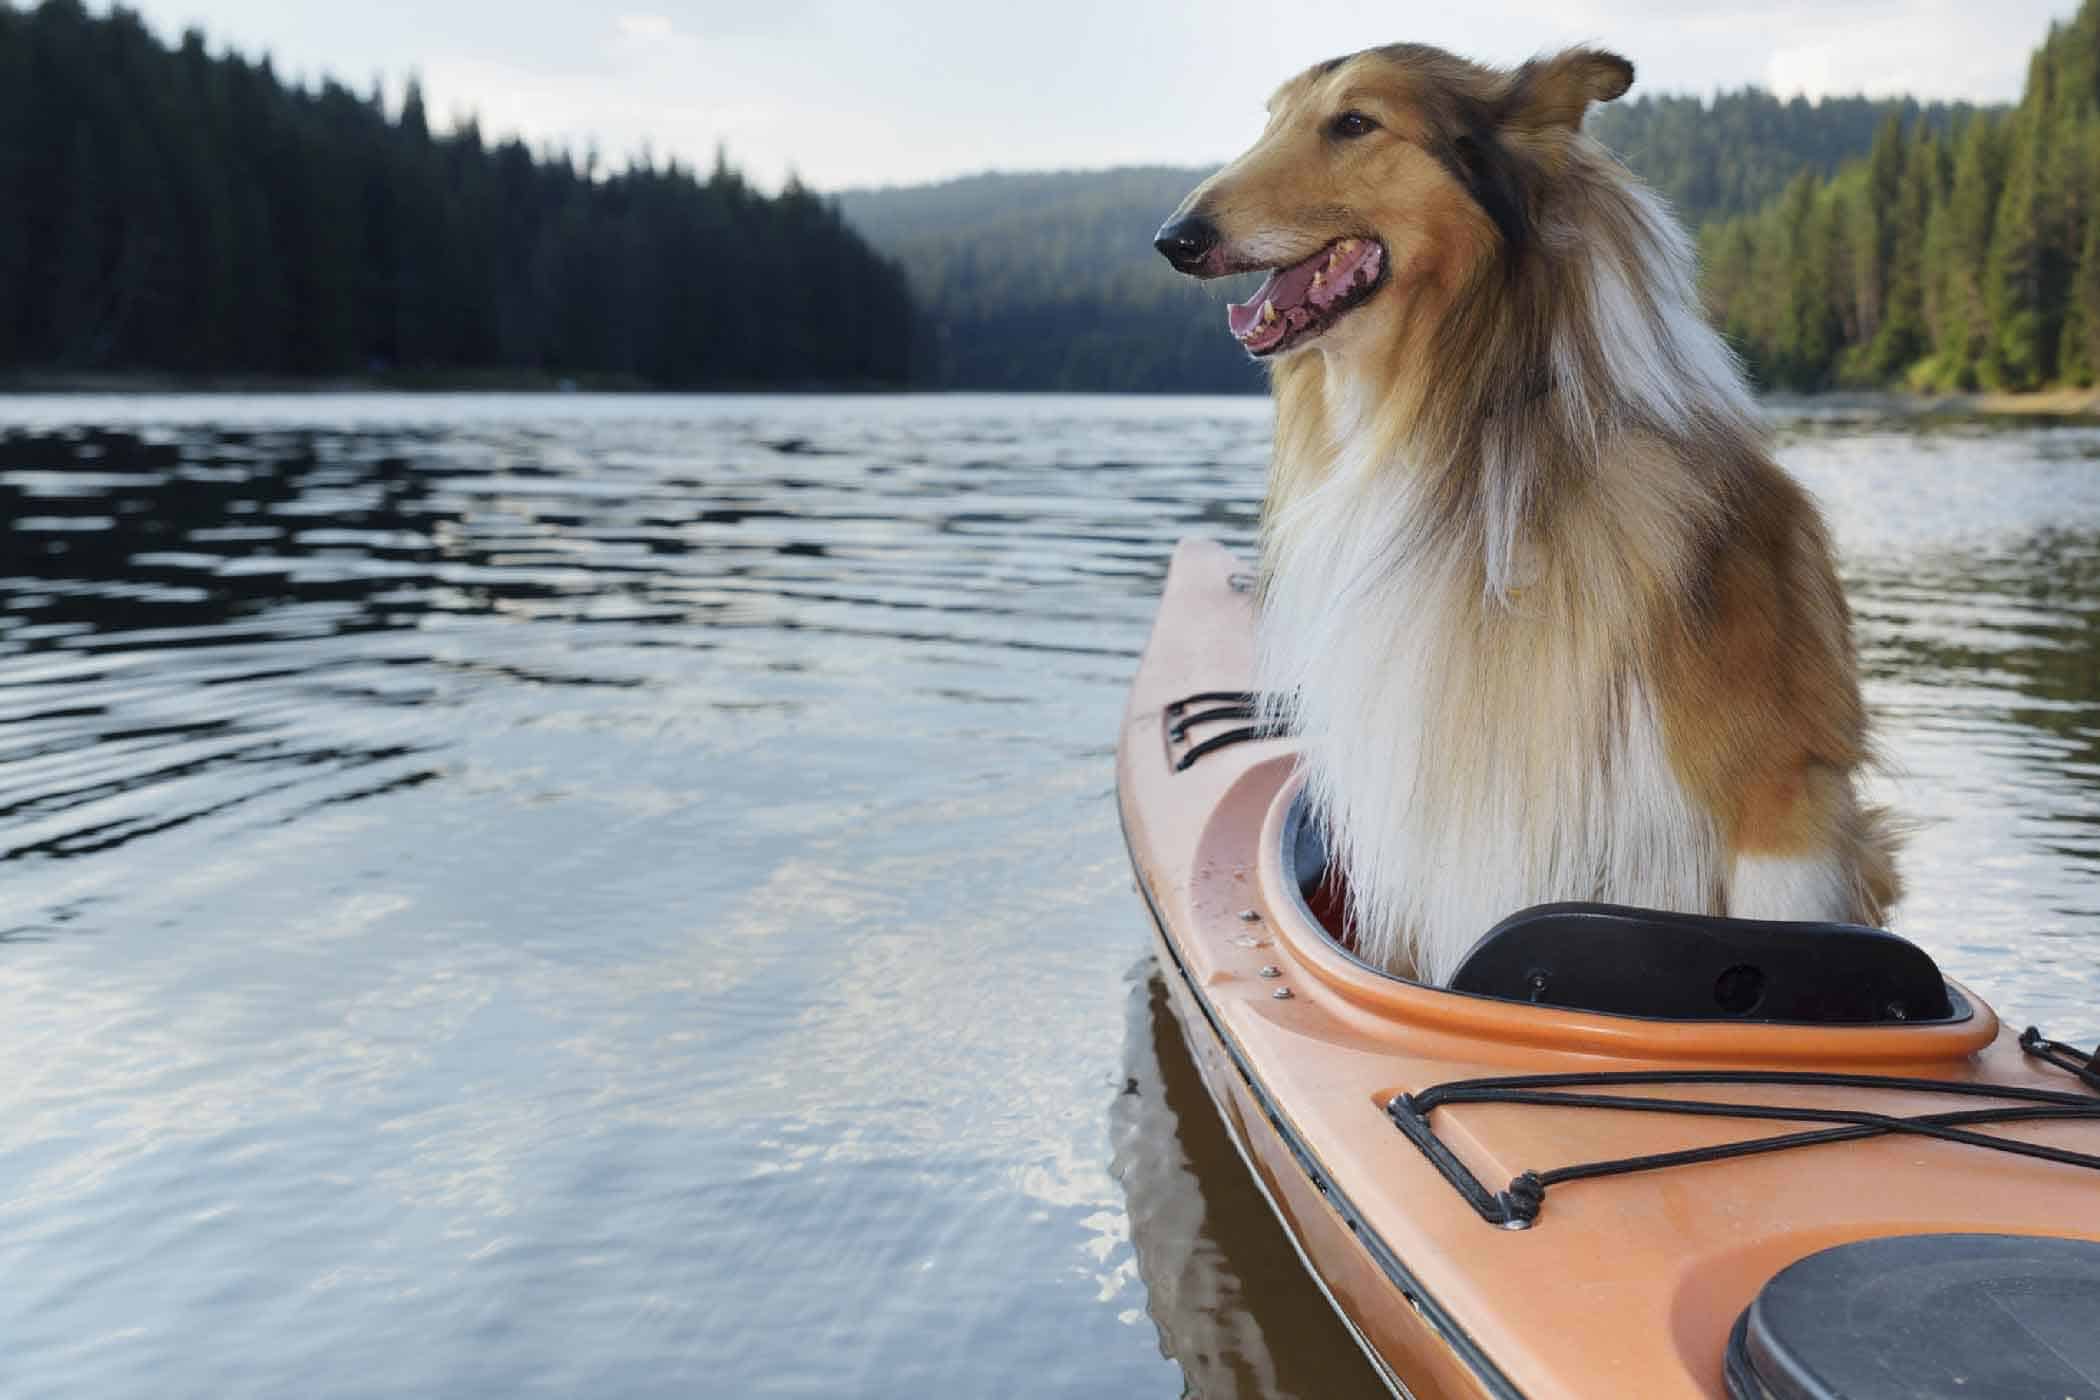 The Best Kayak For Dogs In 2022 – Buying Guide And Reviews